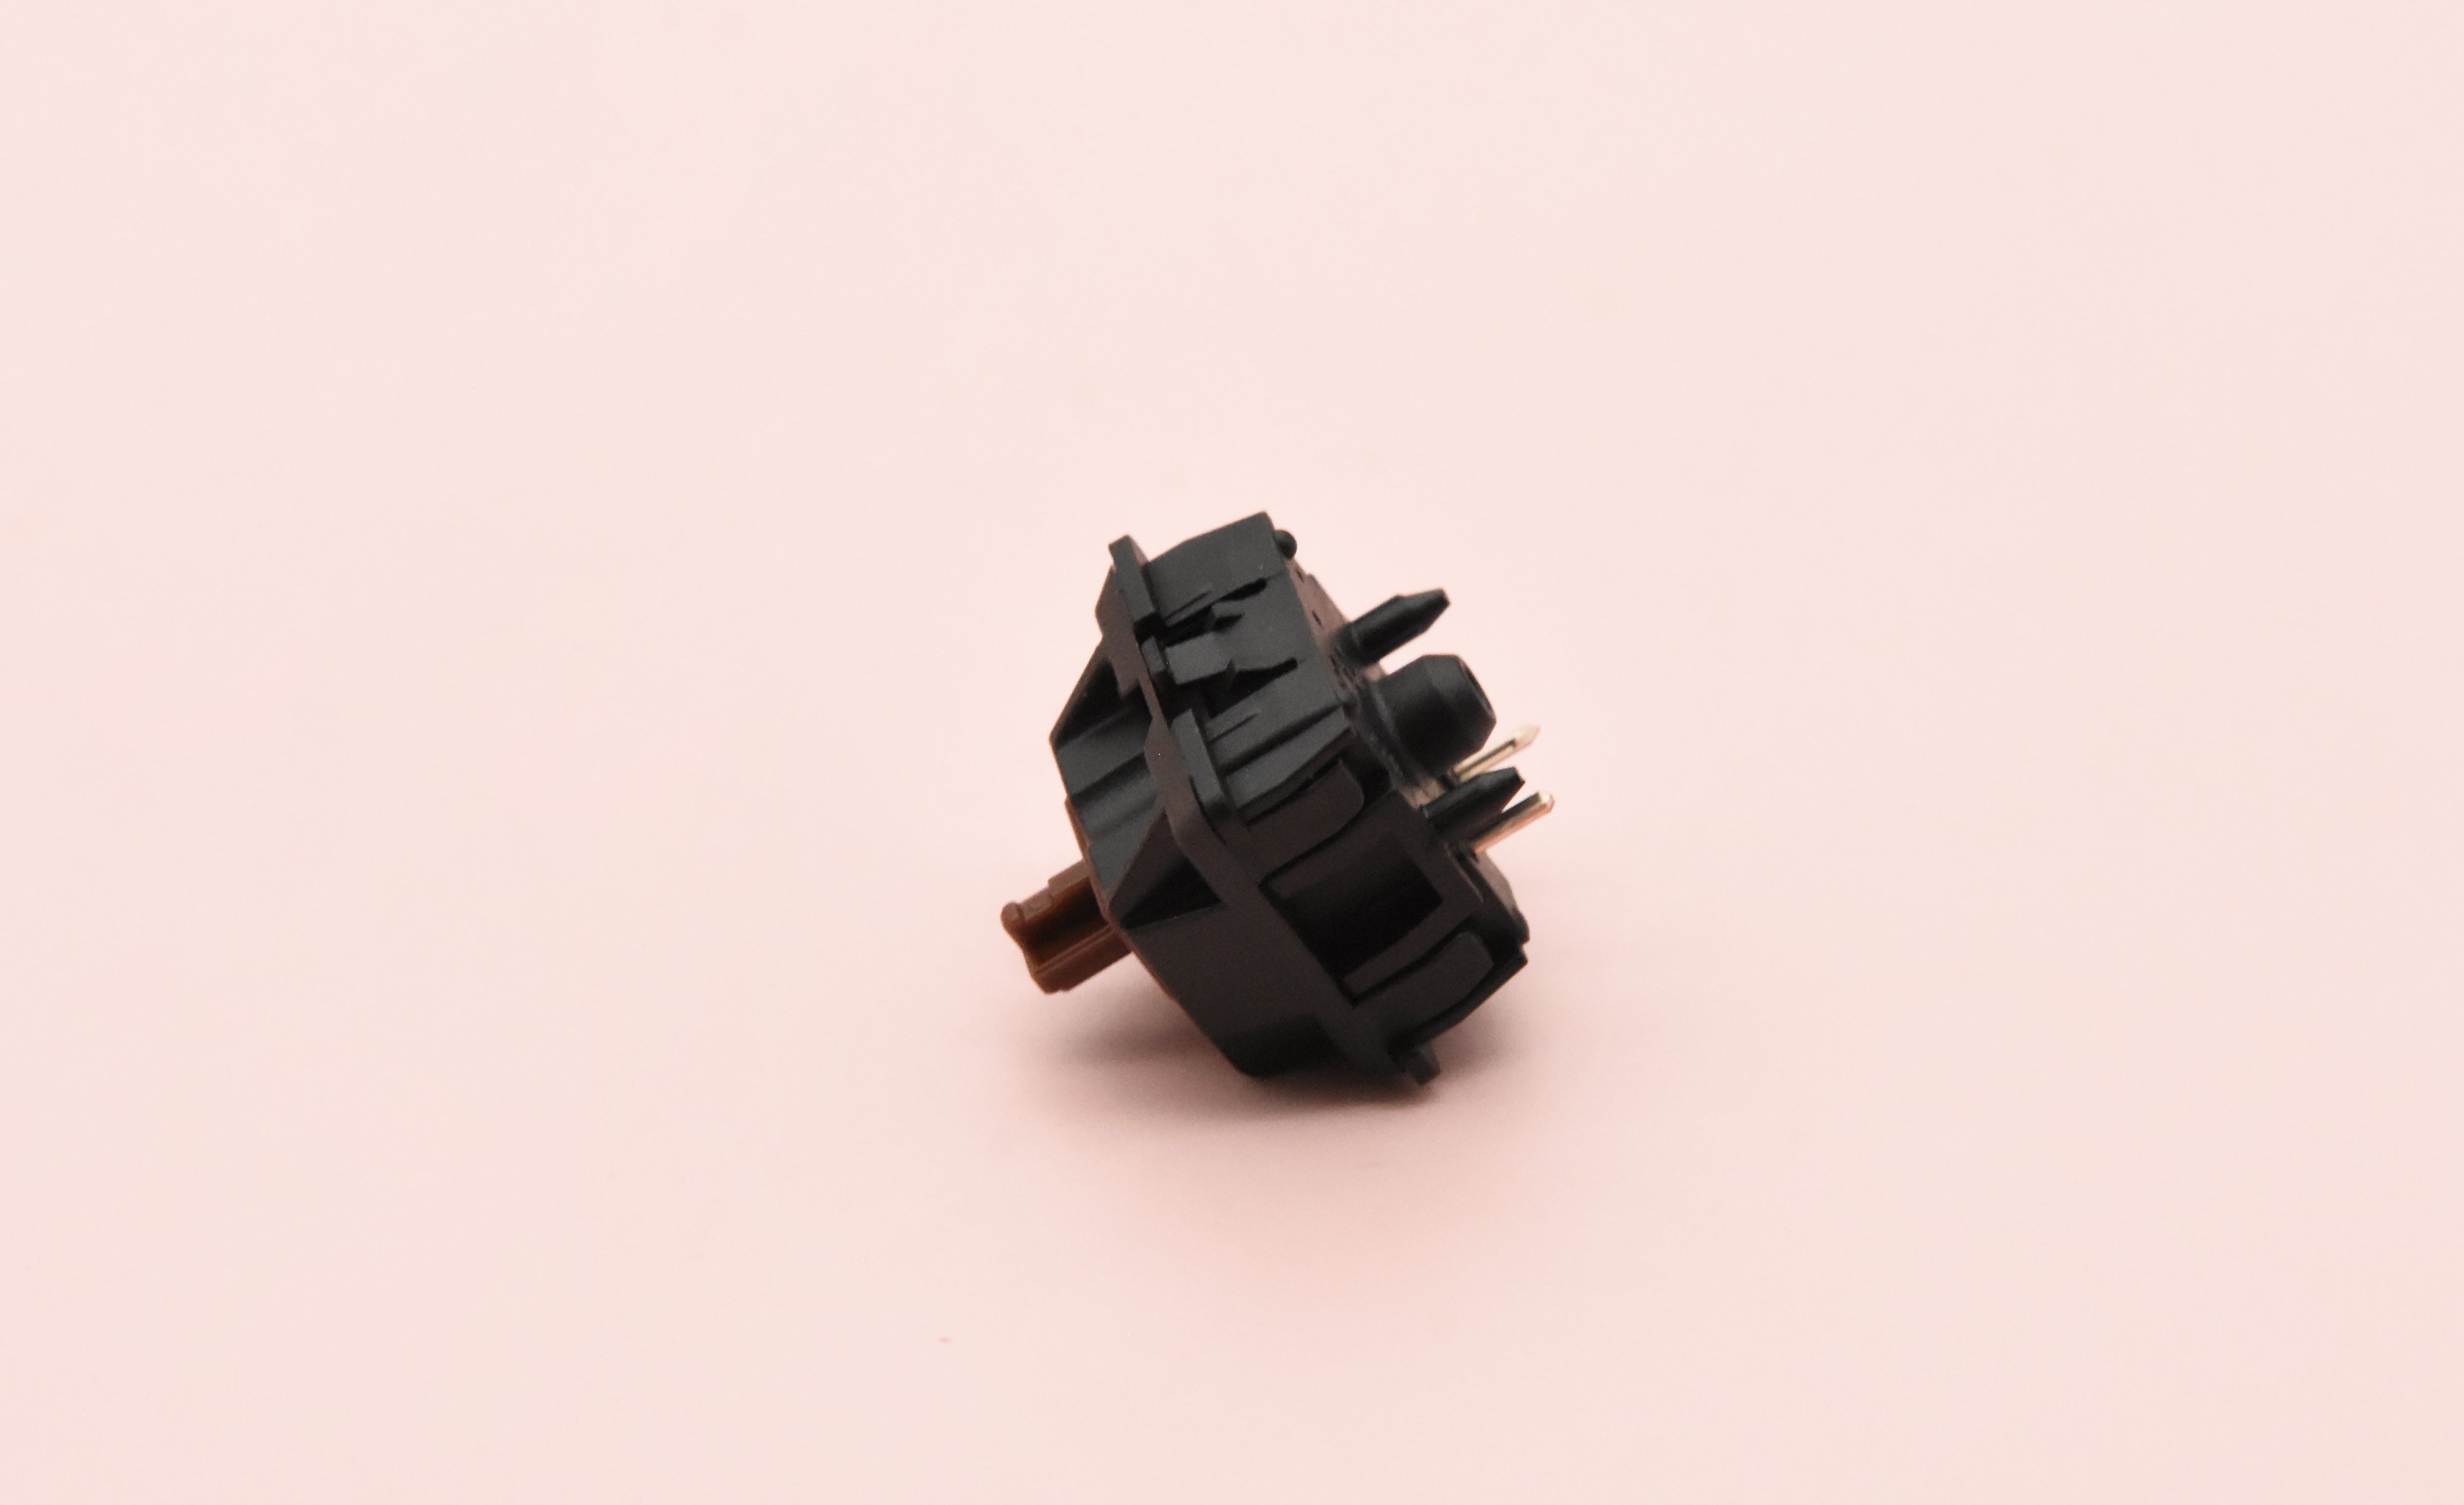 CHERRY MX HYPERGLIDE BROWN TACTILE SWITCH (10 PCS)